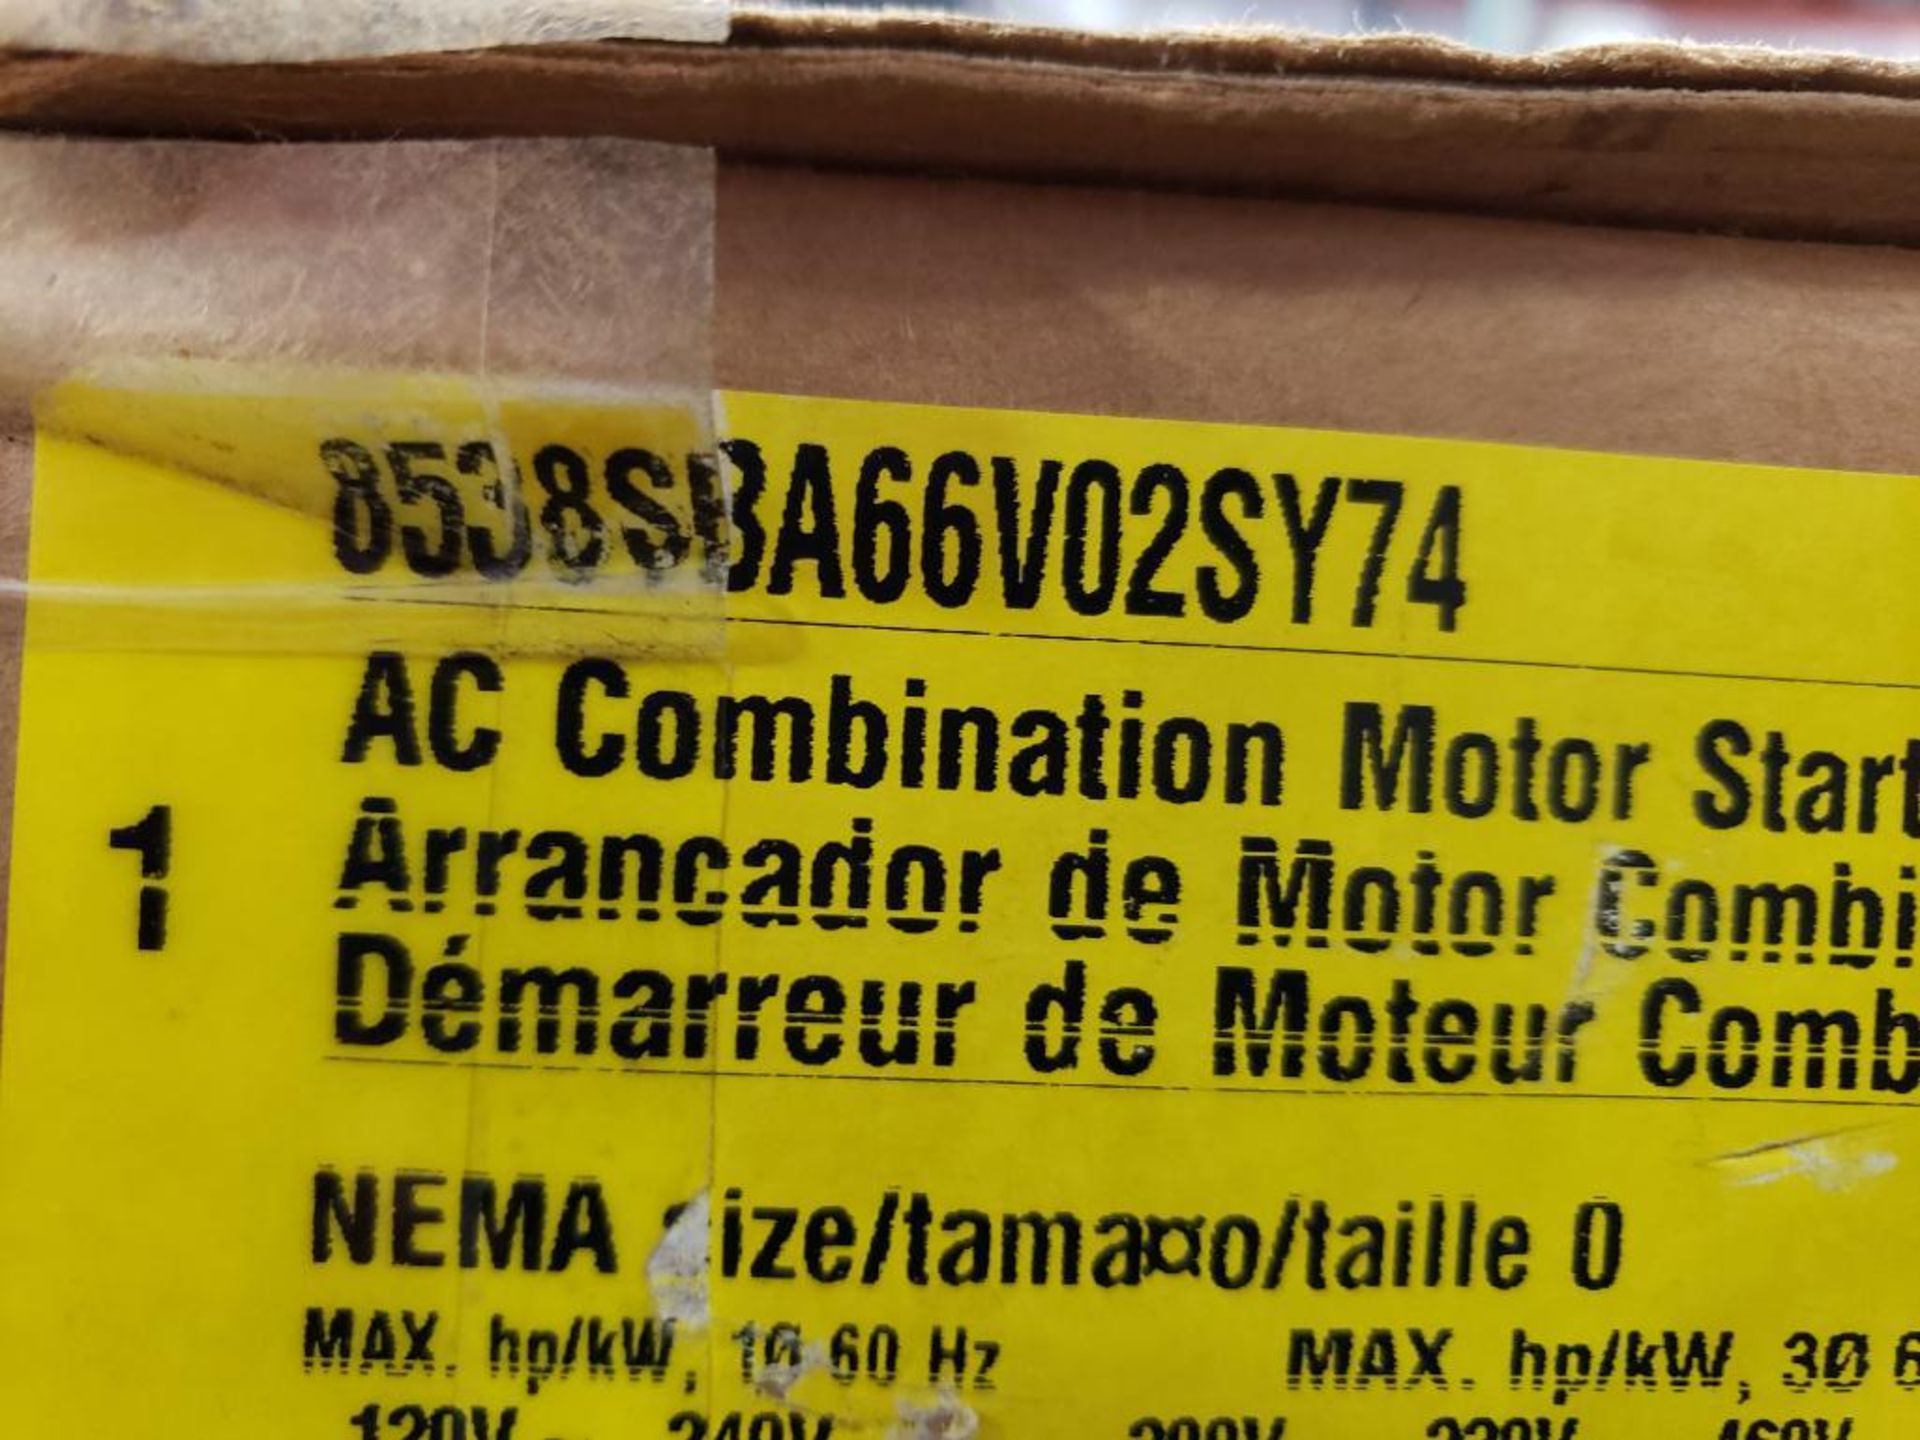 Square-D 8538SBA66V02SY74 AC Combination motor starter. New in box. - Image 3 of 4